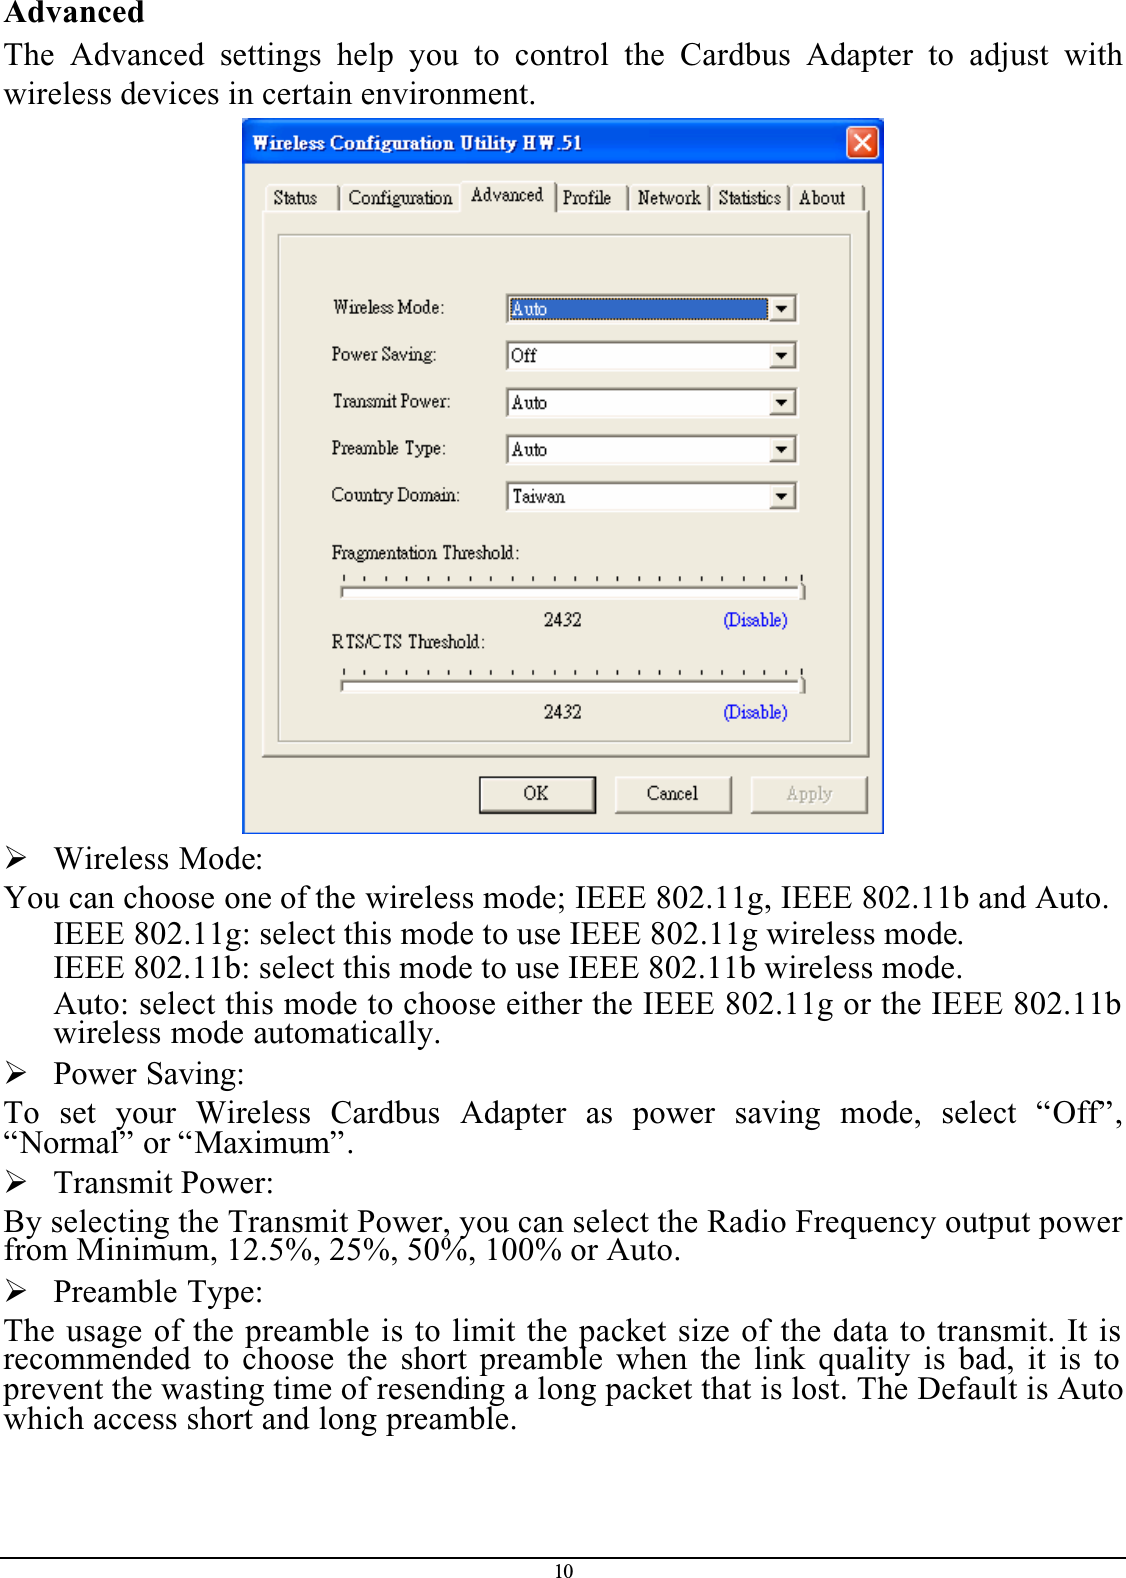 10AdvancedThe Advanced settings help you to control the Cardbus Adapter to adjust withwireless devices in certain environment.¾Wireless Mode:You can choose one of the wireless mode; IEEE 802.11g, IEEE 802.11b and Auto.IEEE 802.11g: select this mode to use IEEE 802.11g wireless mode.IEEE 802.11b: select this mode to use IEEE 802.11b wireless mode.Auto: select this mode to choose either the IEEE 802.11g or the IEEE 802.11b wireless mode automatically.¾Power Saving:To set your Wireless Cardbus Adapter as power saving mode, select “Off”,“Normal” or “Maximum”.¾Transmit Power:By selecting the Transmit Power, you can select the Radio Frequency output power from Minimum, 12.5%, 25%, 50%, 100% or Auto.¾Preamble Type:The usage of the preamble is to limit the packet size of the data to transmit. It is recommended to choose the short preamble when the link quality is bad, it is to prevent the wasting time of resending a long packet that is lost. The Default is Auto which access short and long preamble.